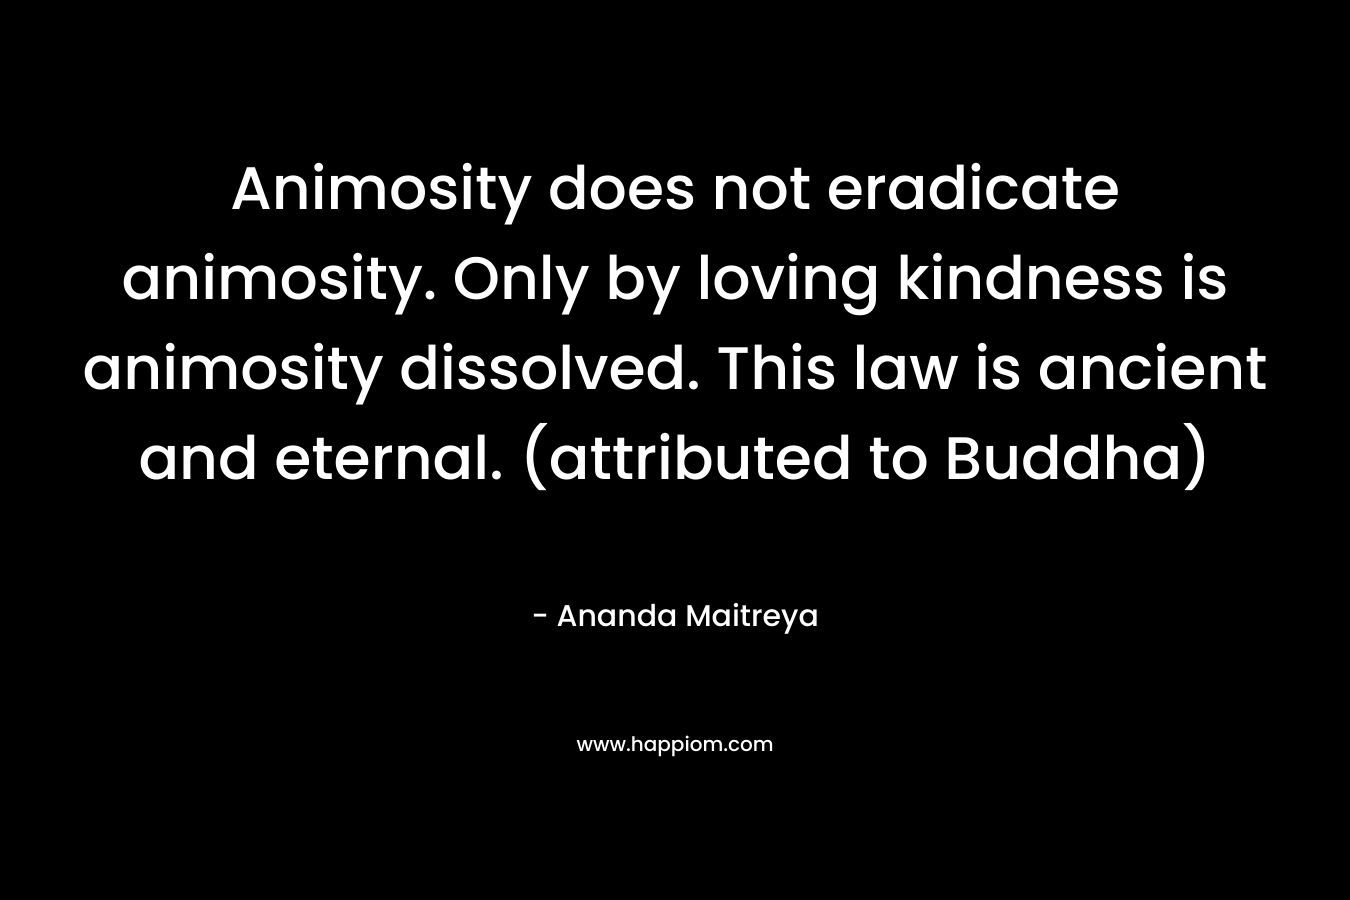 Animosity does not eradicate animosity. Only by loving kindness is animosity dissolved. This law is ancient and eternal. (attributed to Buddha) – Ananda Maitreya